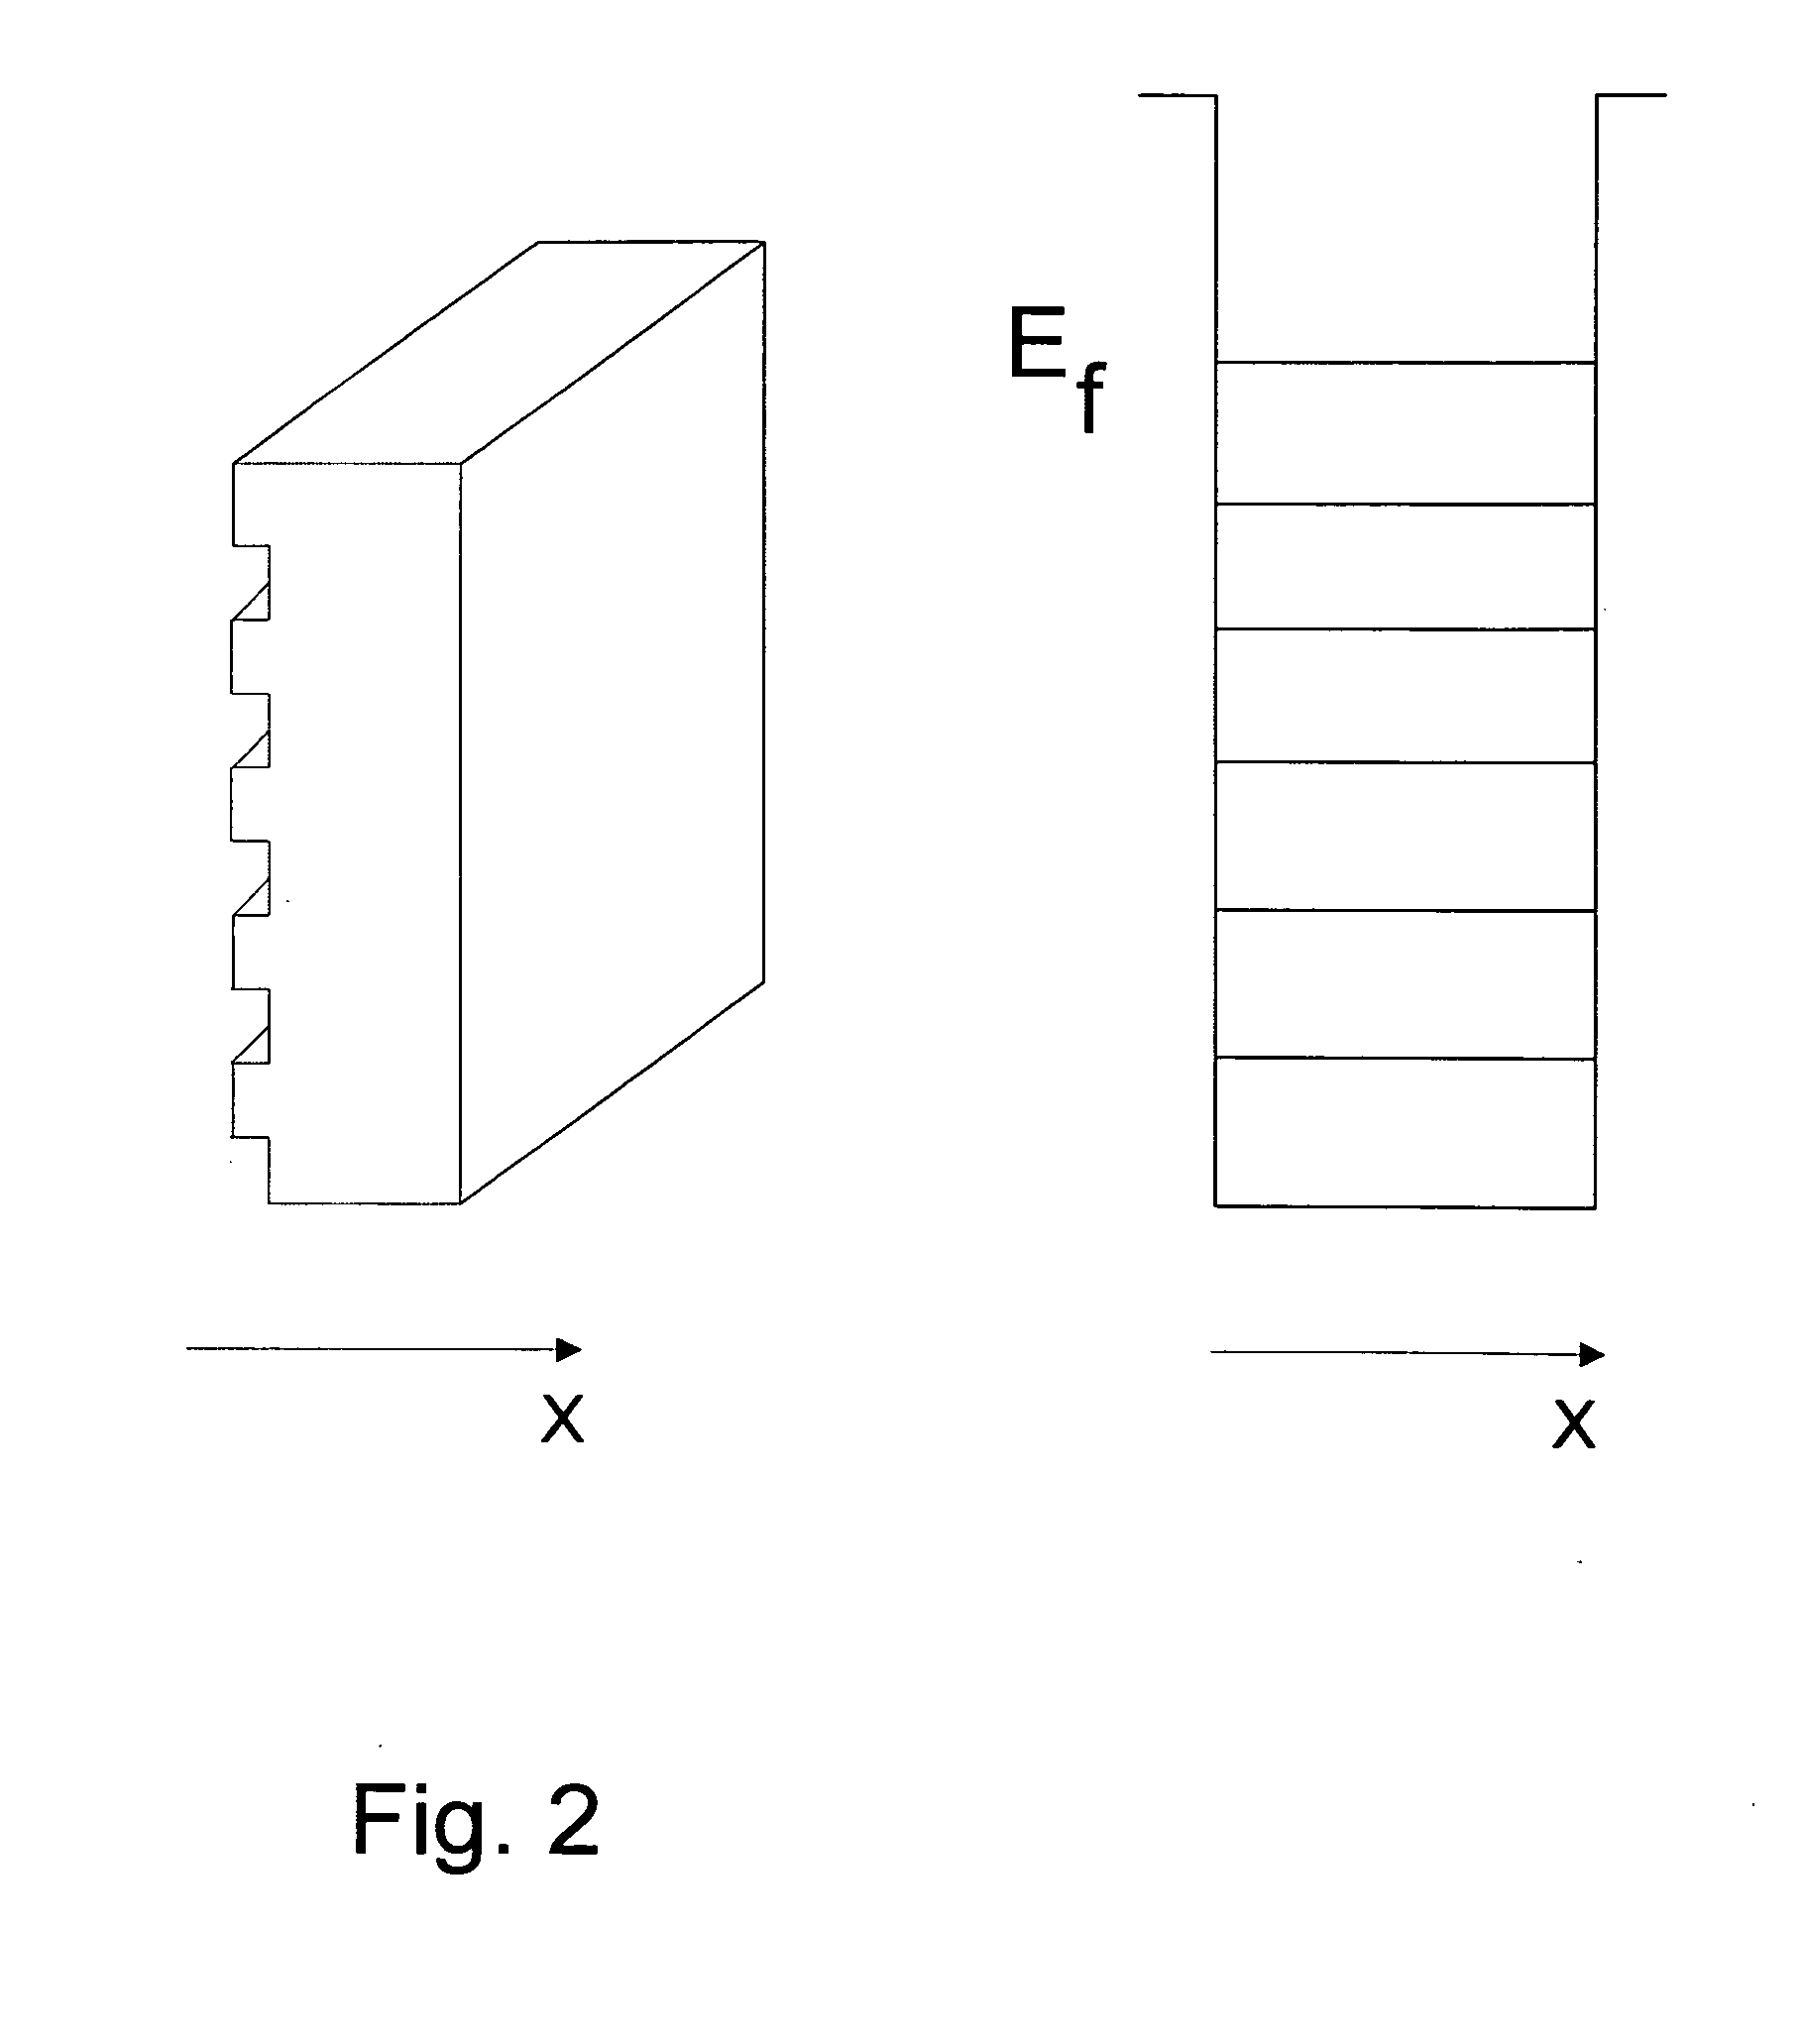 Method of fabrication of high temperature superconductors based on new mechanism of electron-electron interaction